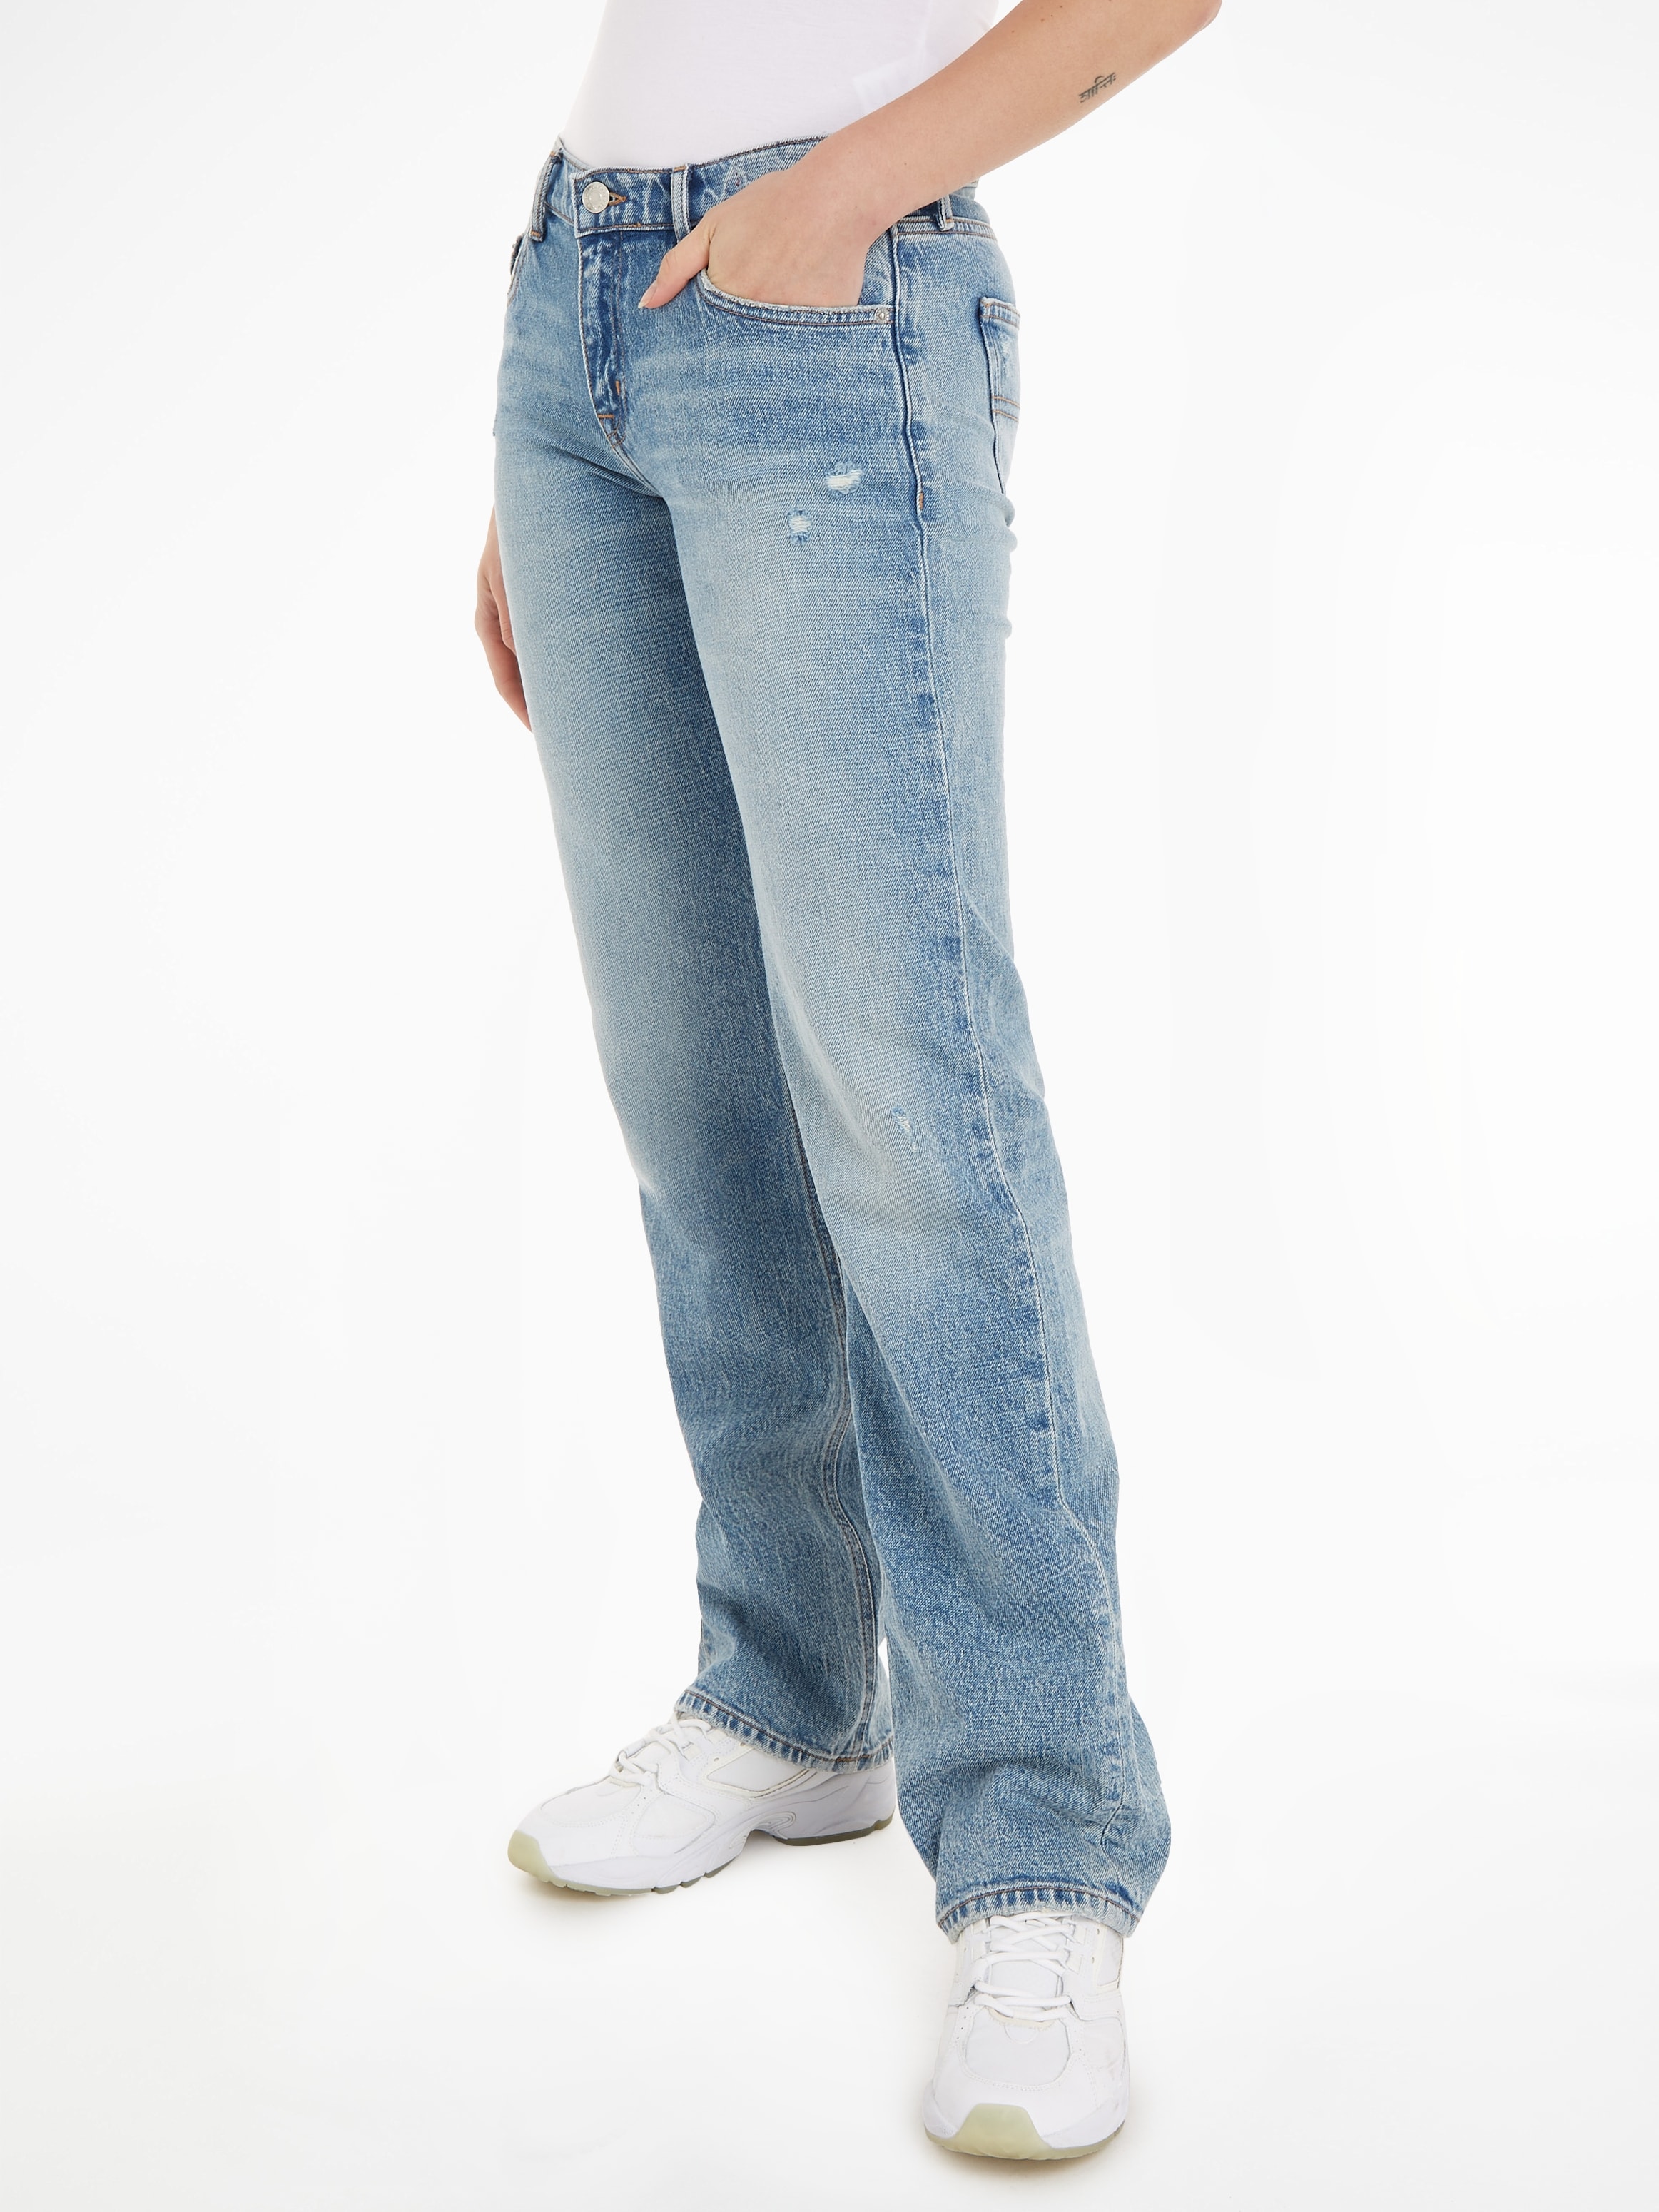 Jeans Tommy Logobadge OTTO bei Straight-Jeans, Labelflags und mit